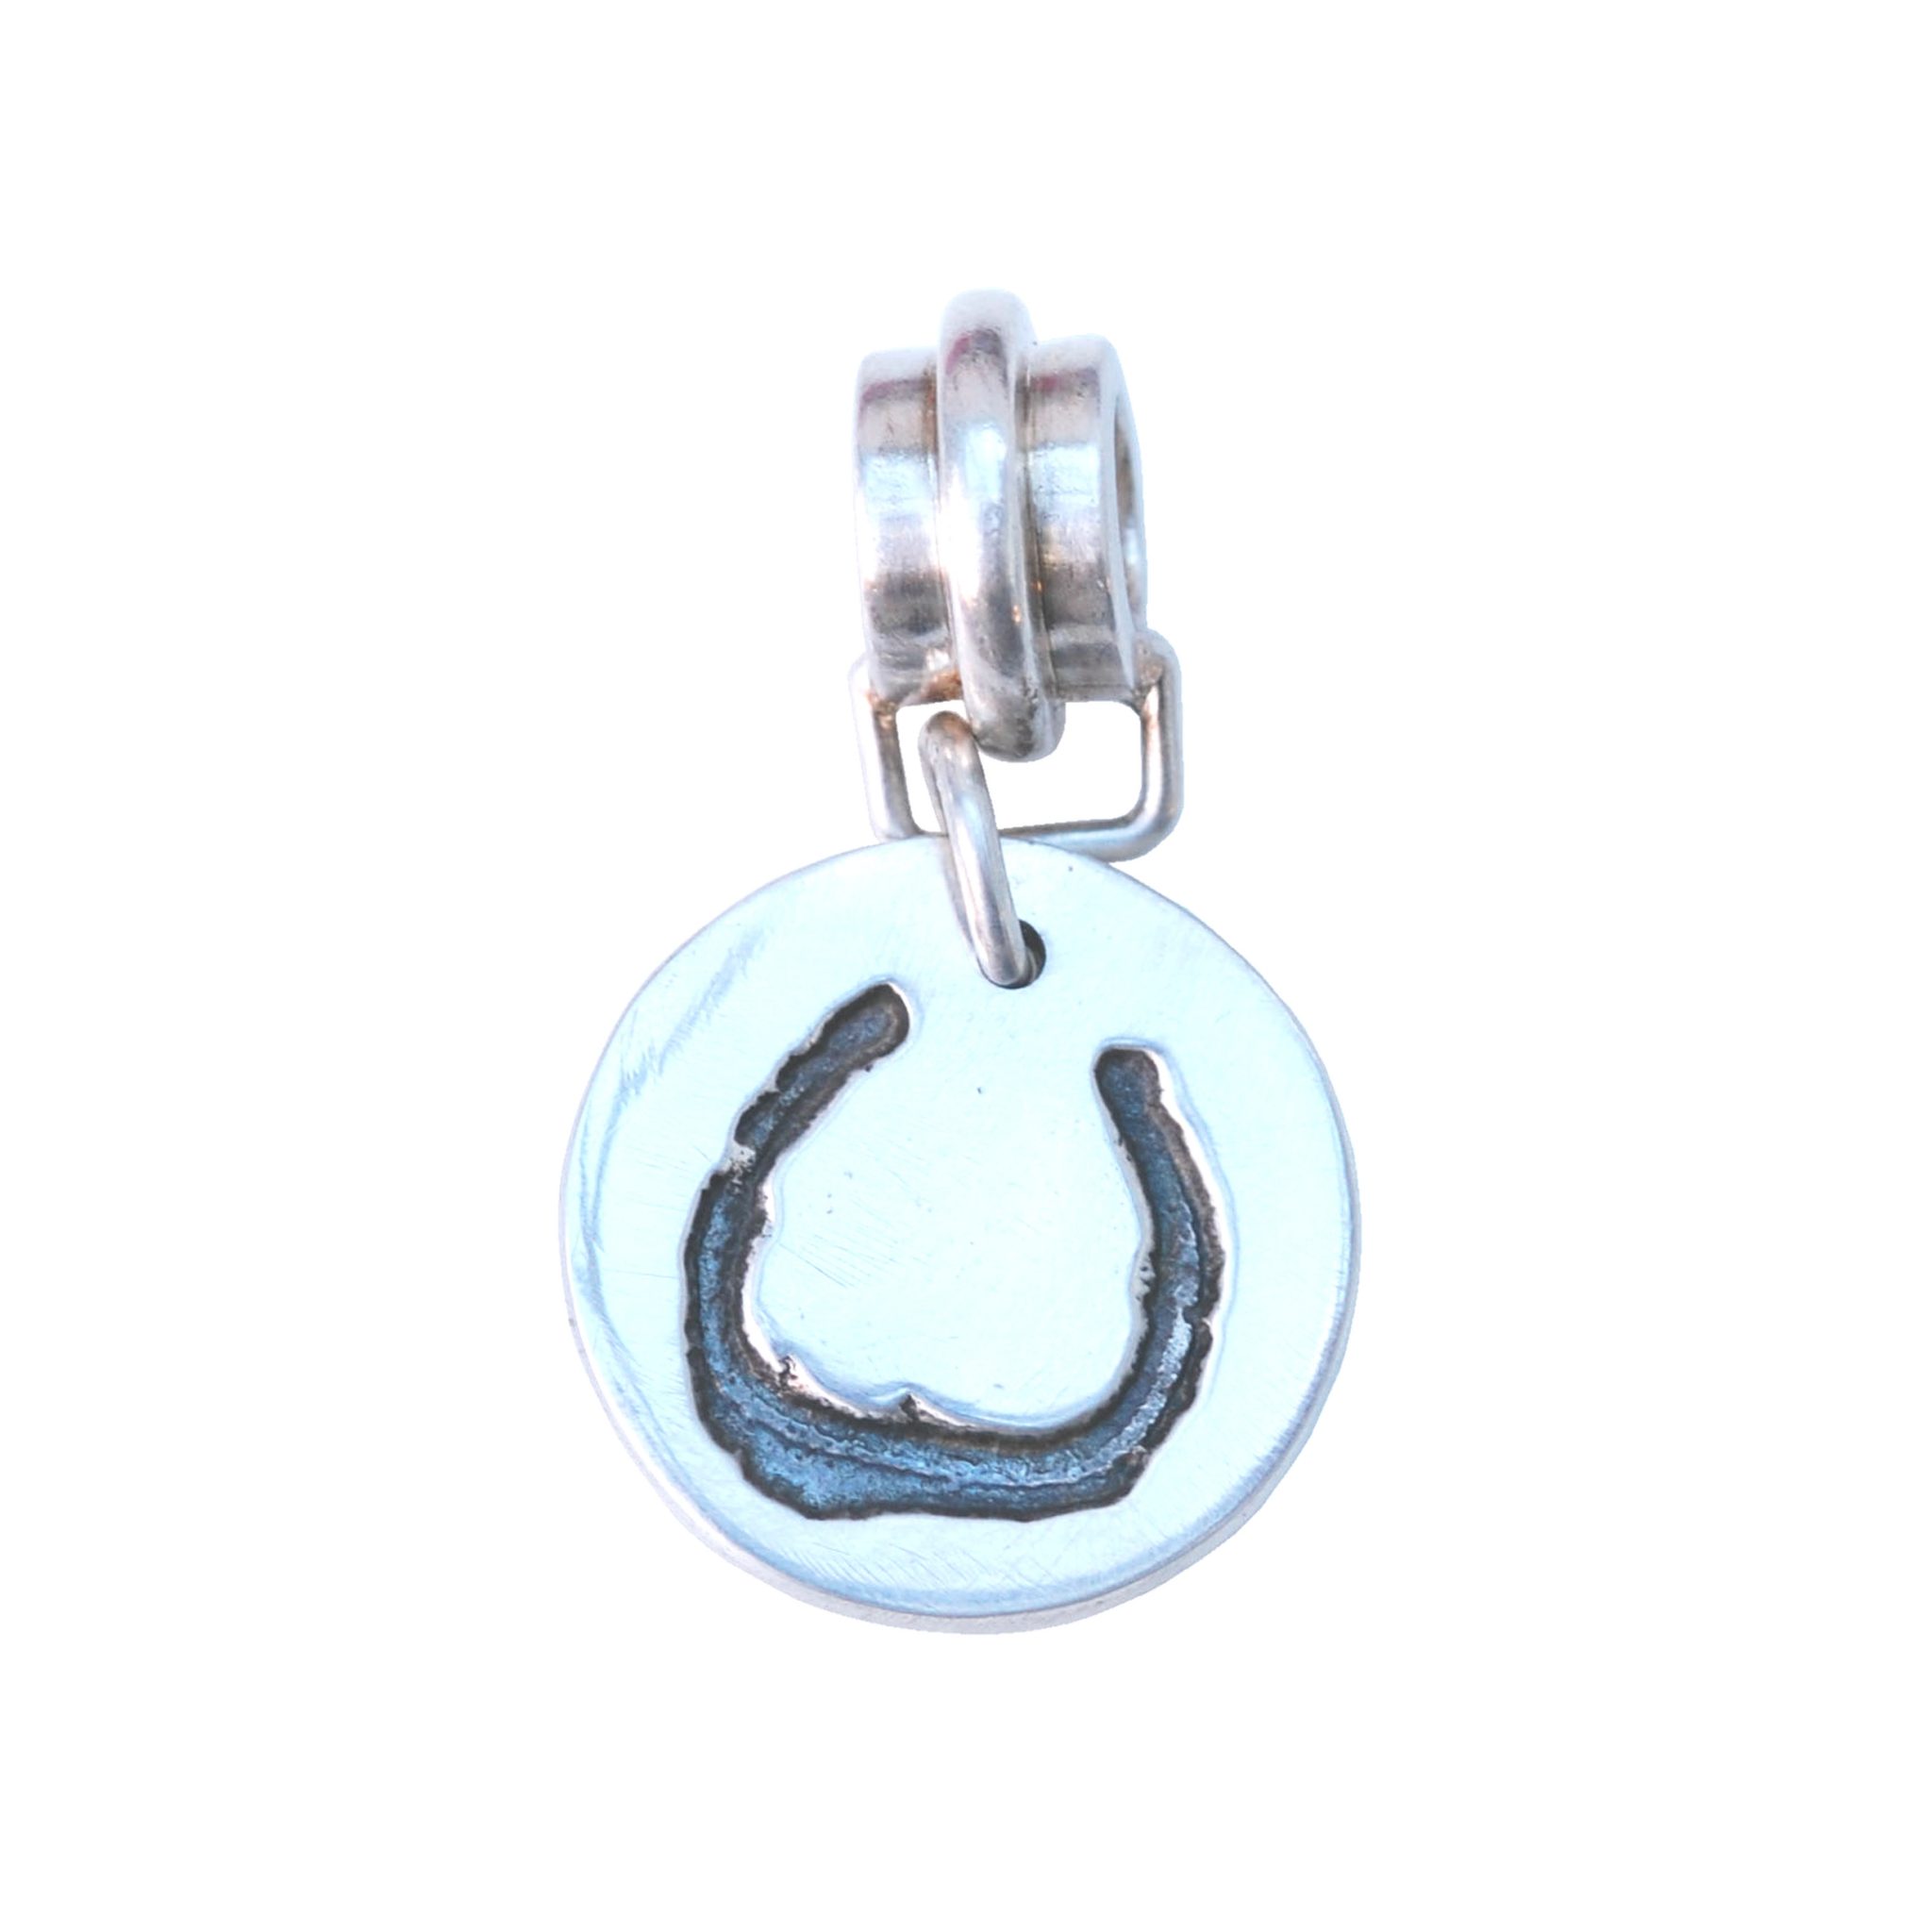 Small silver charm with your horse's shoe with charm carrier